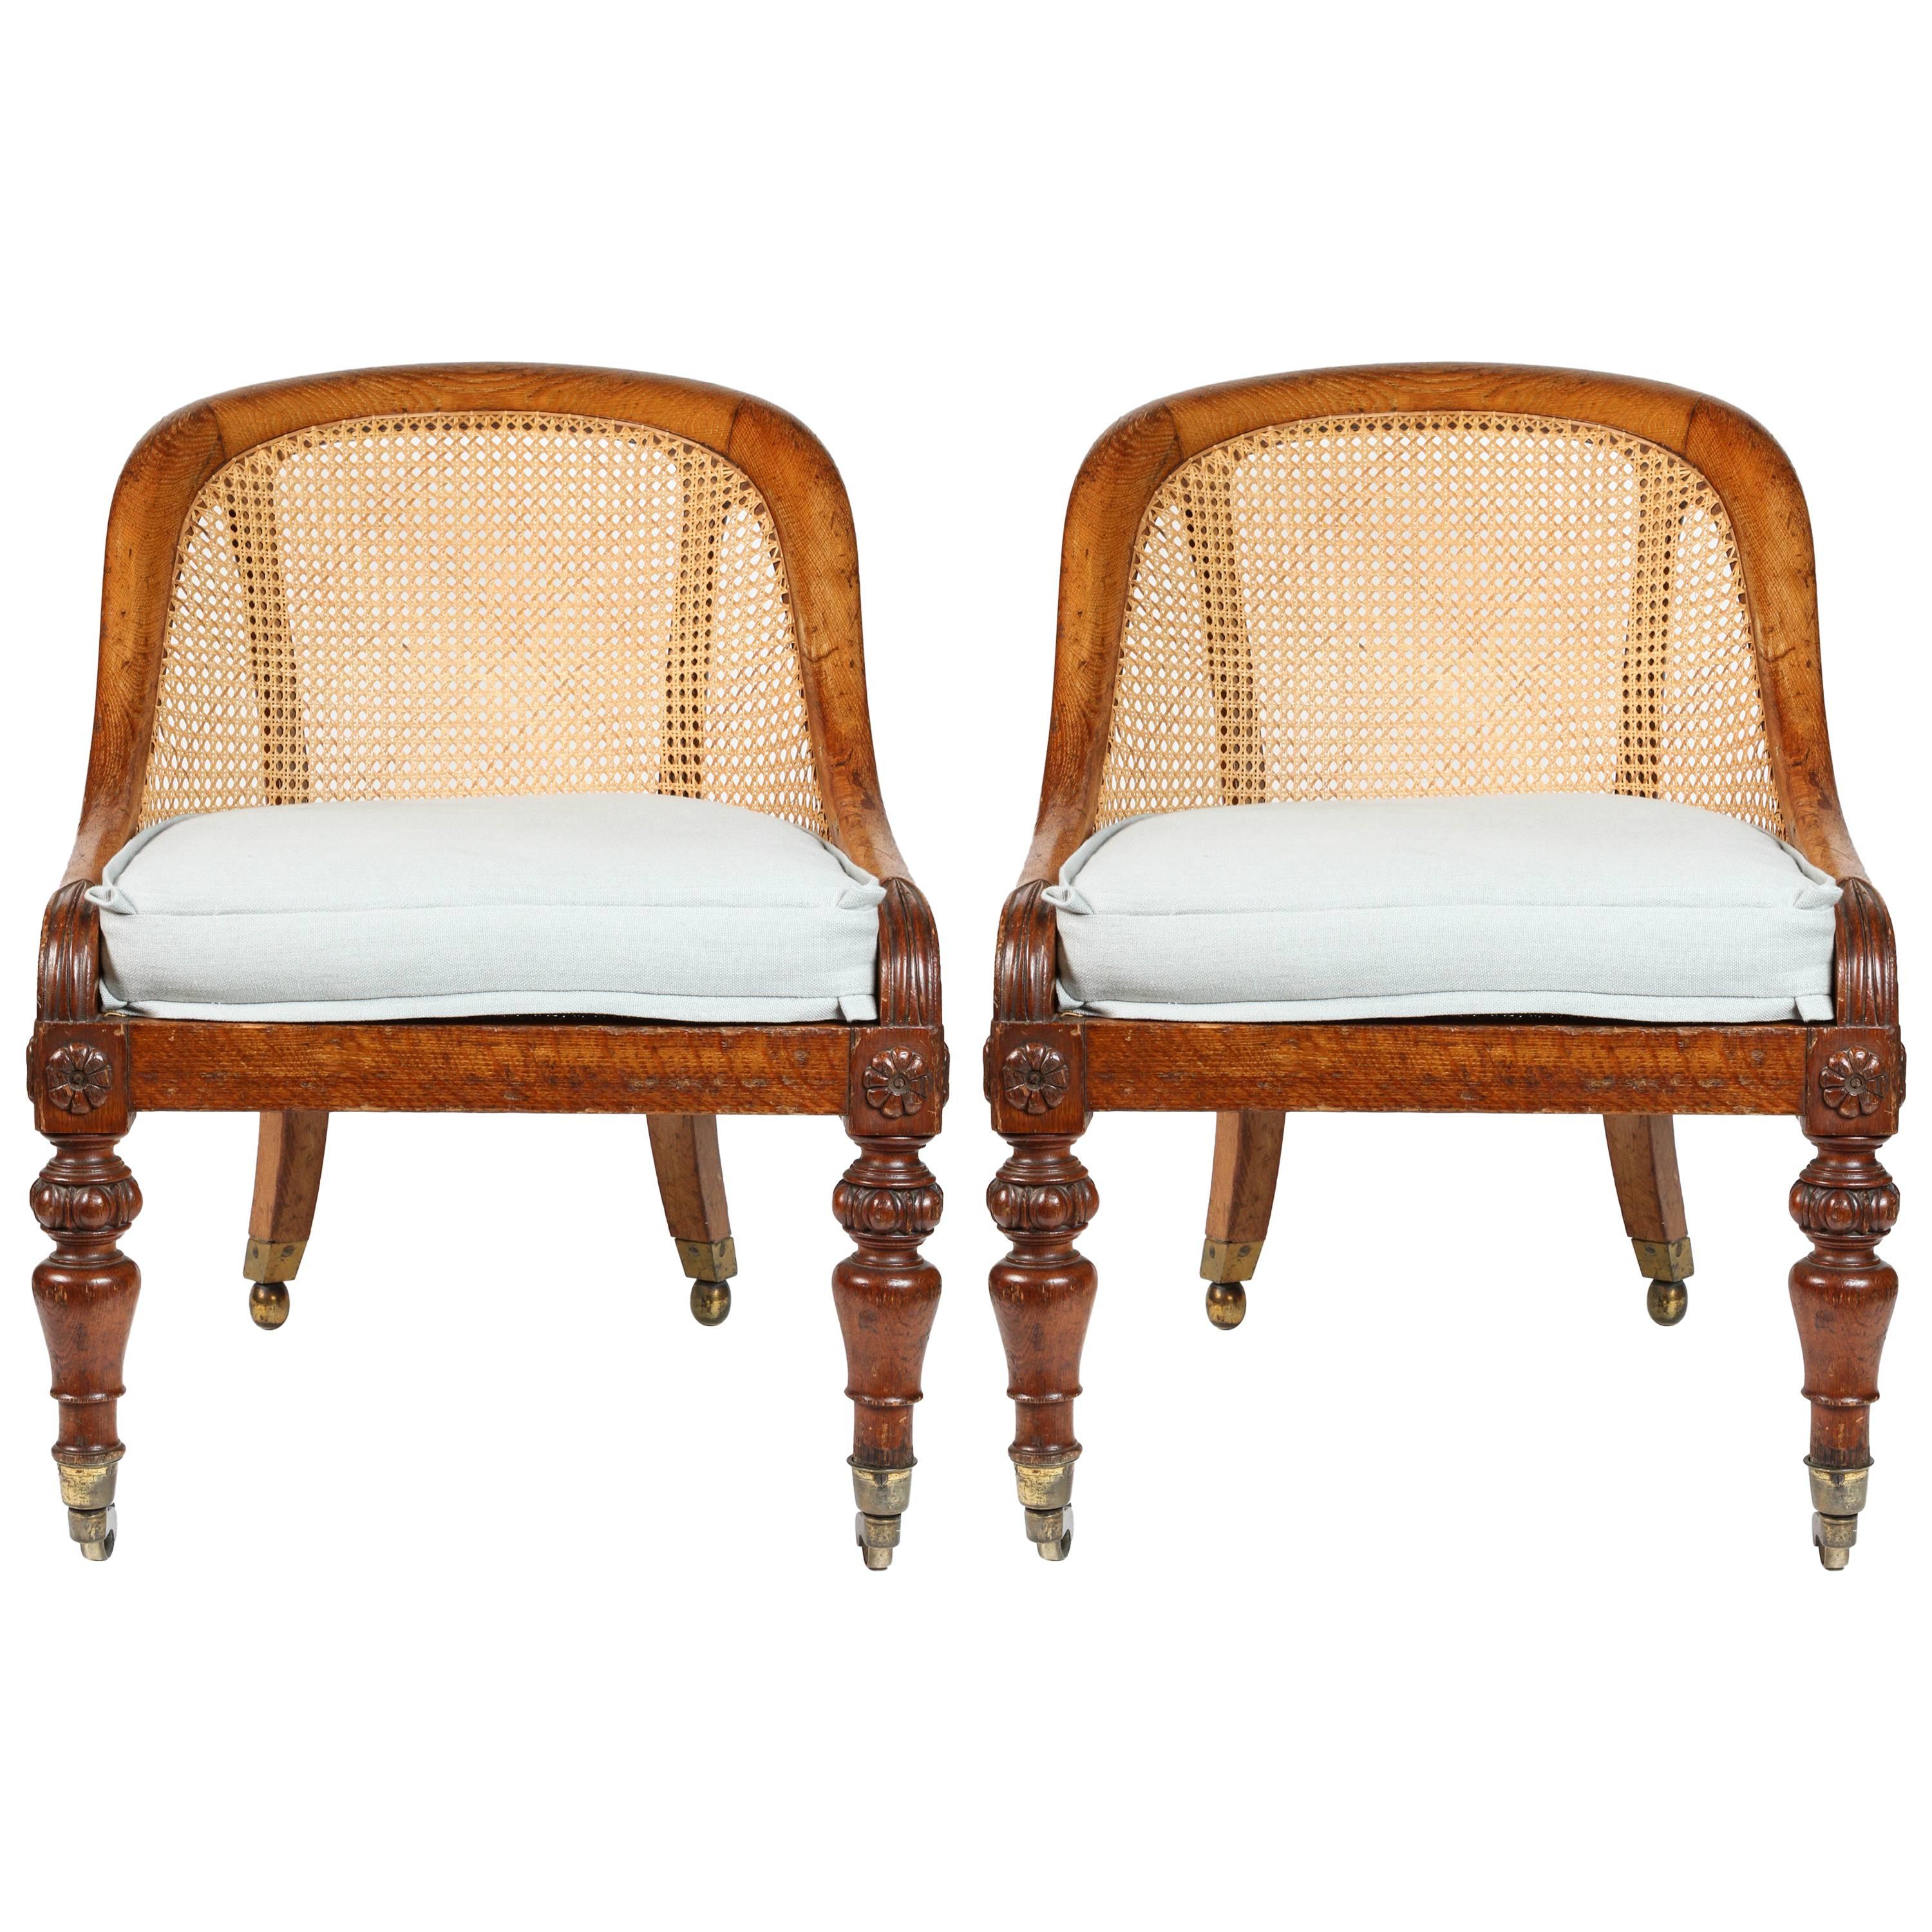 19th Century Pair of English Caned Spoon-Back Chairs For Sale